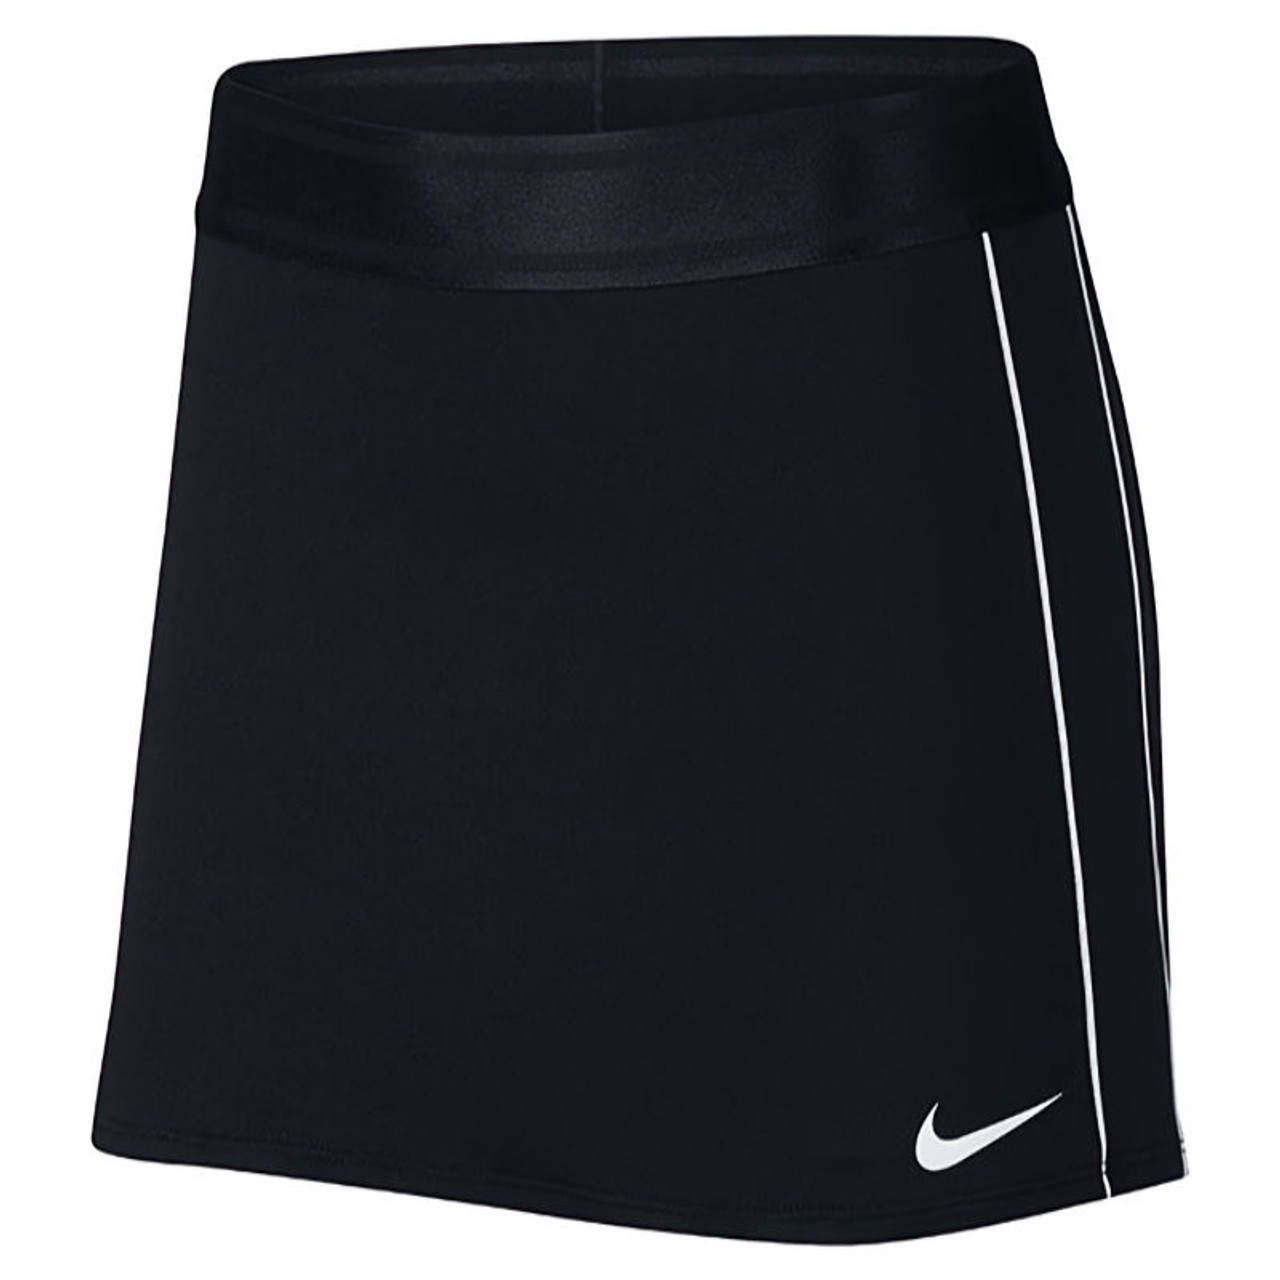 Nike Court Dry Straight Skirt available in Tall, Black